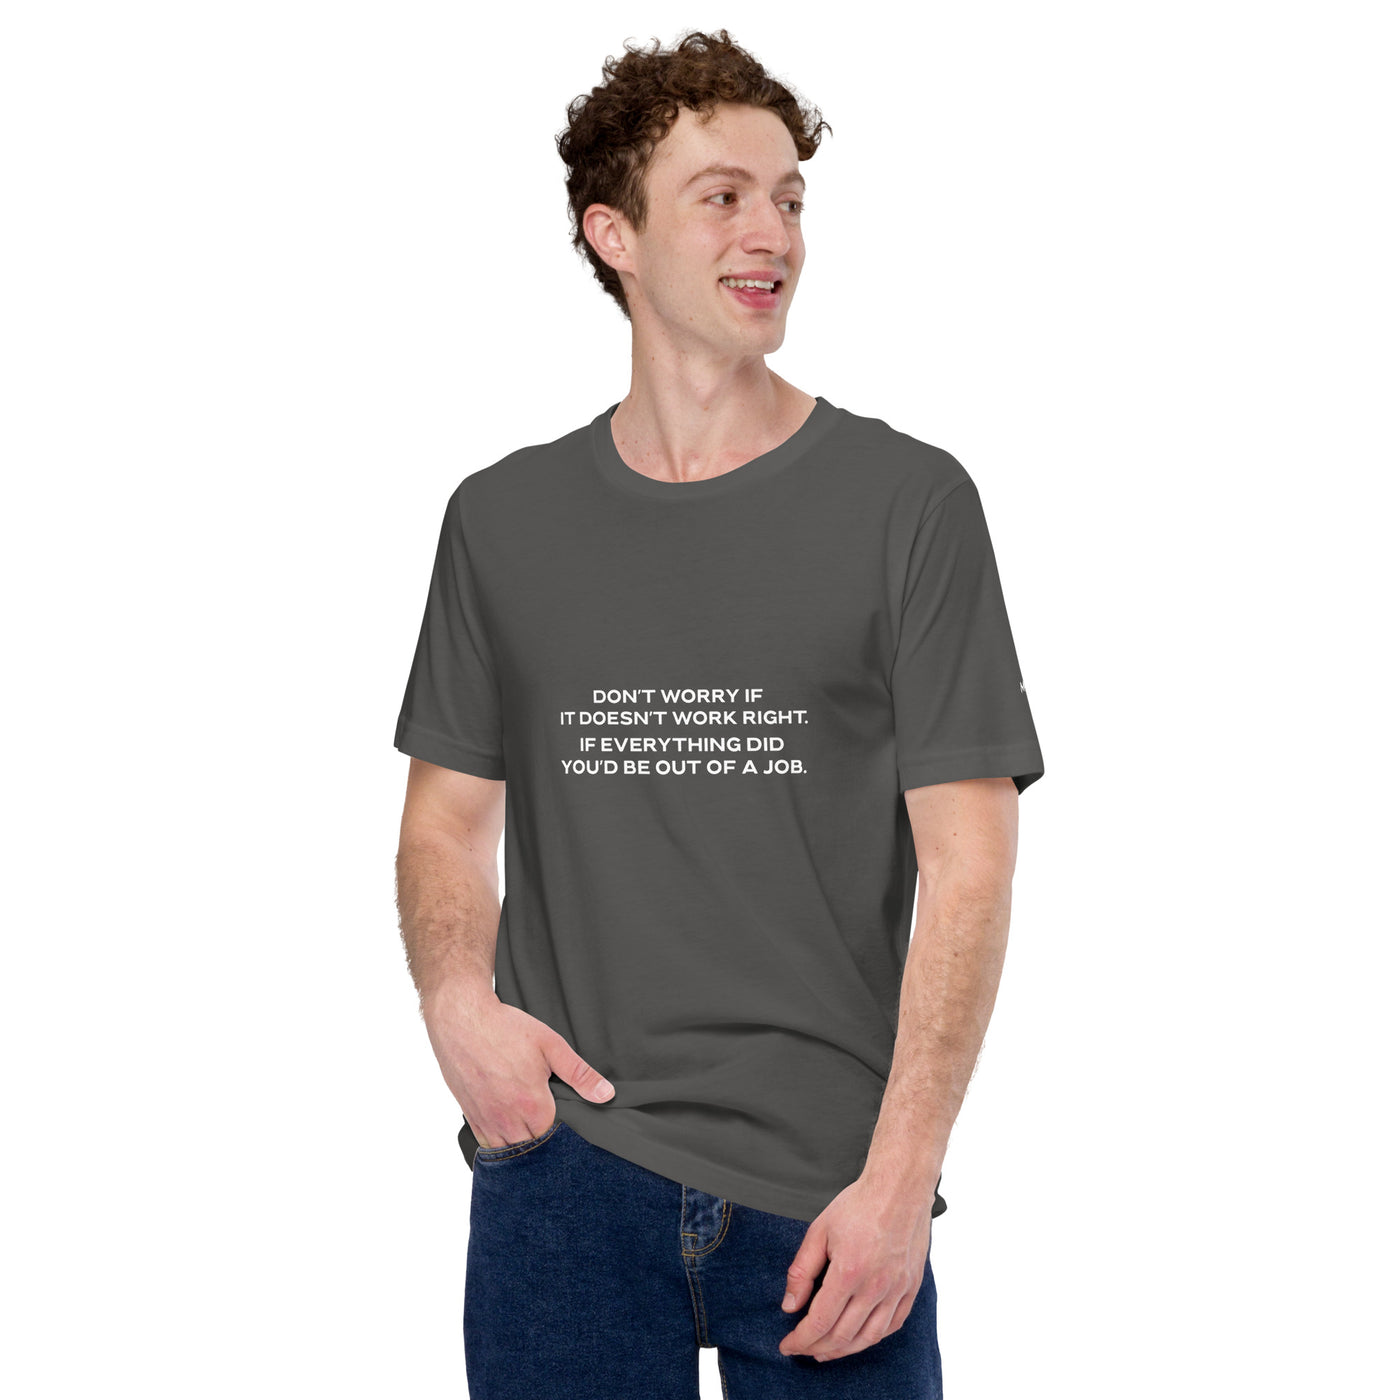 Don't worry if it doesn't work right: if everything did, you would be out of your job V1 - Unisex t-shirt